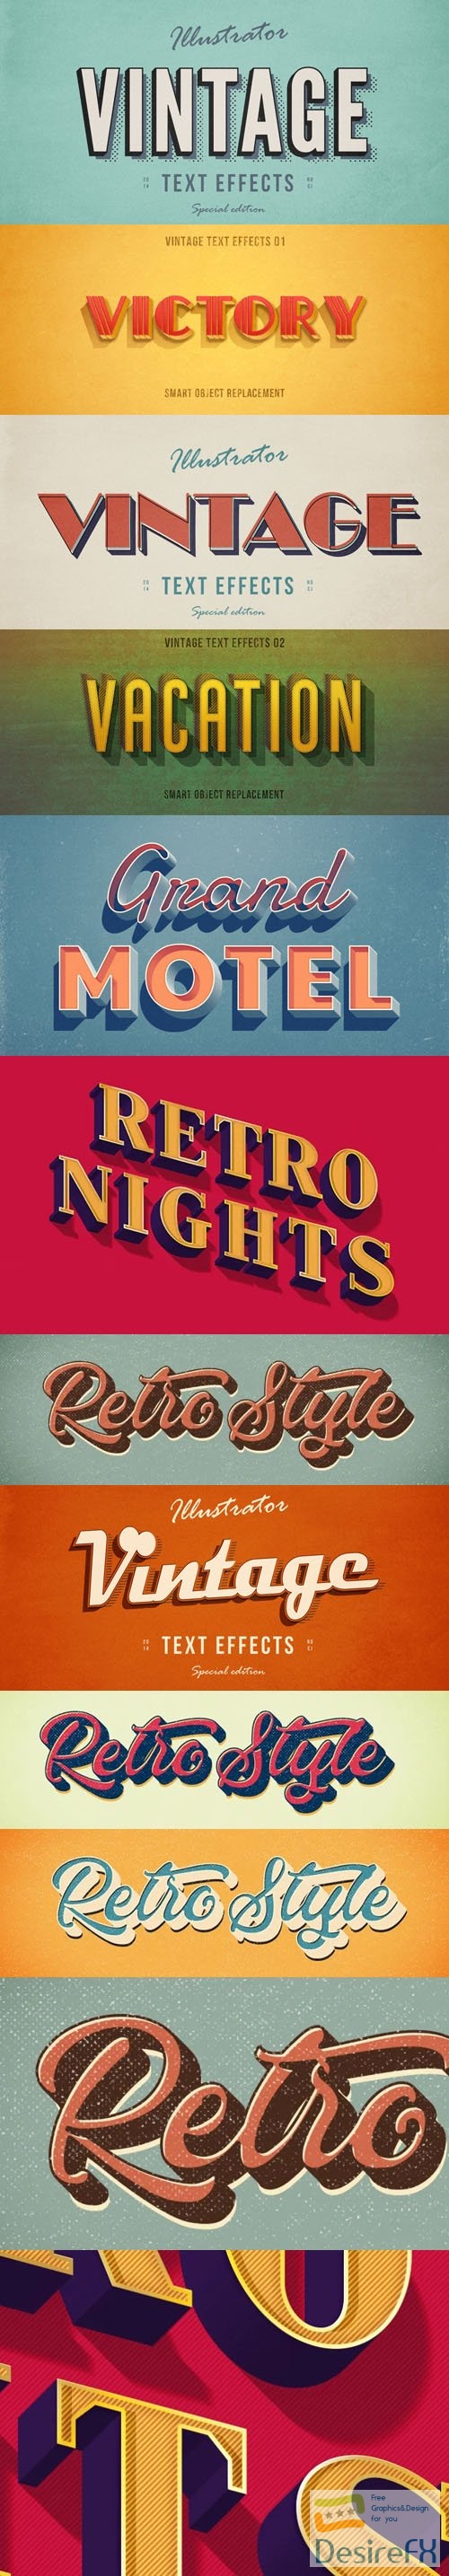 10 Best Vintage & Retro Text Effects for Photoshop